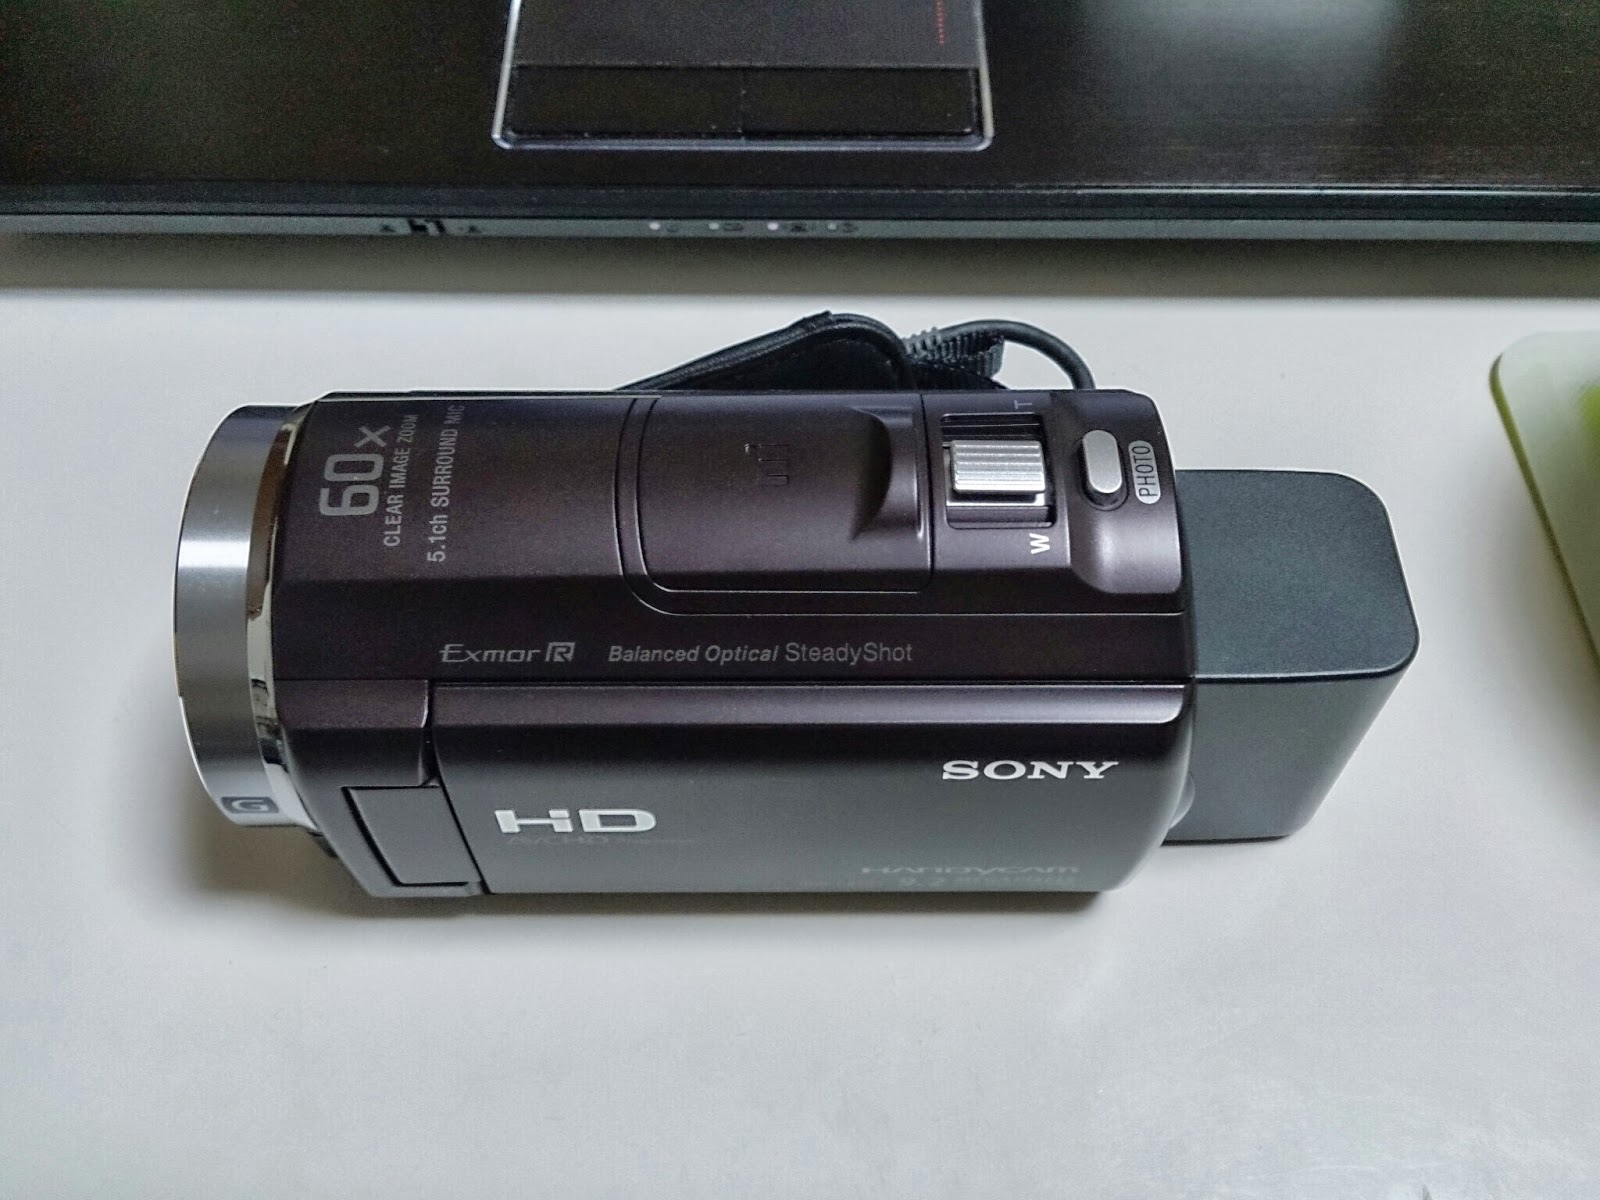 Life like a matchstick: SONY Handycam HDR-CX535 購入